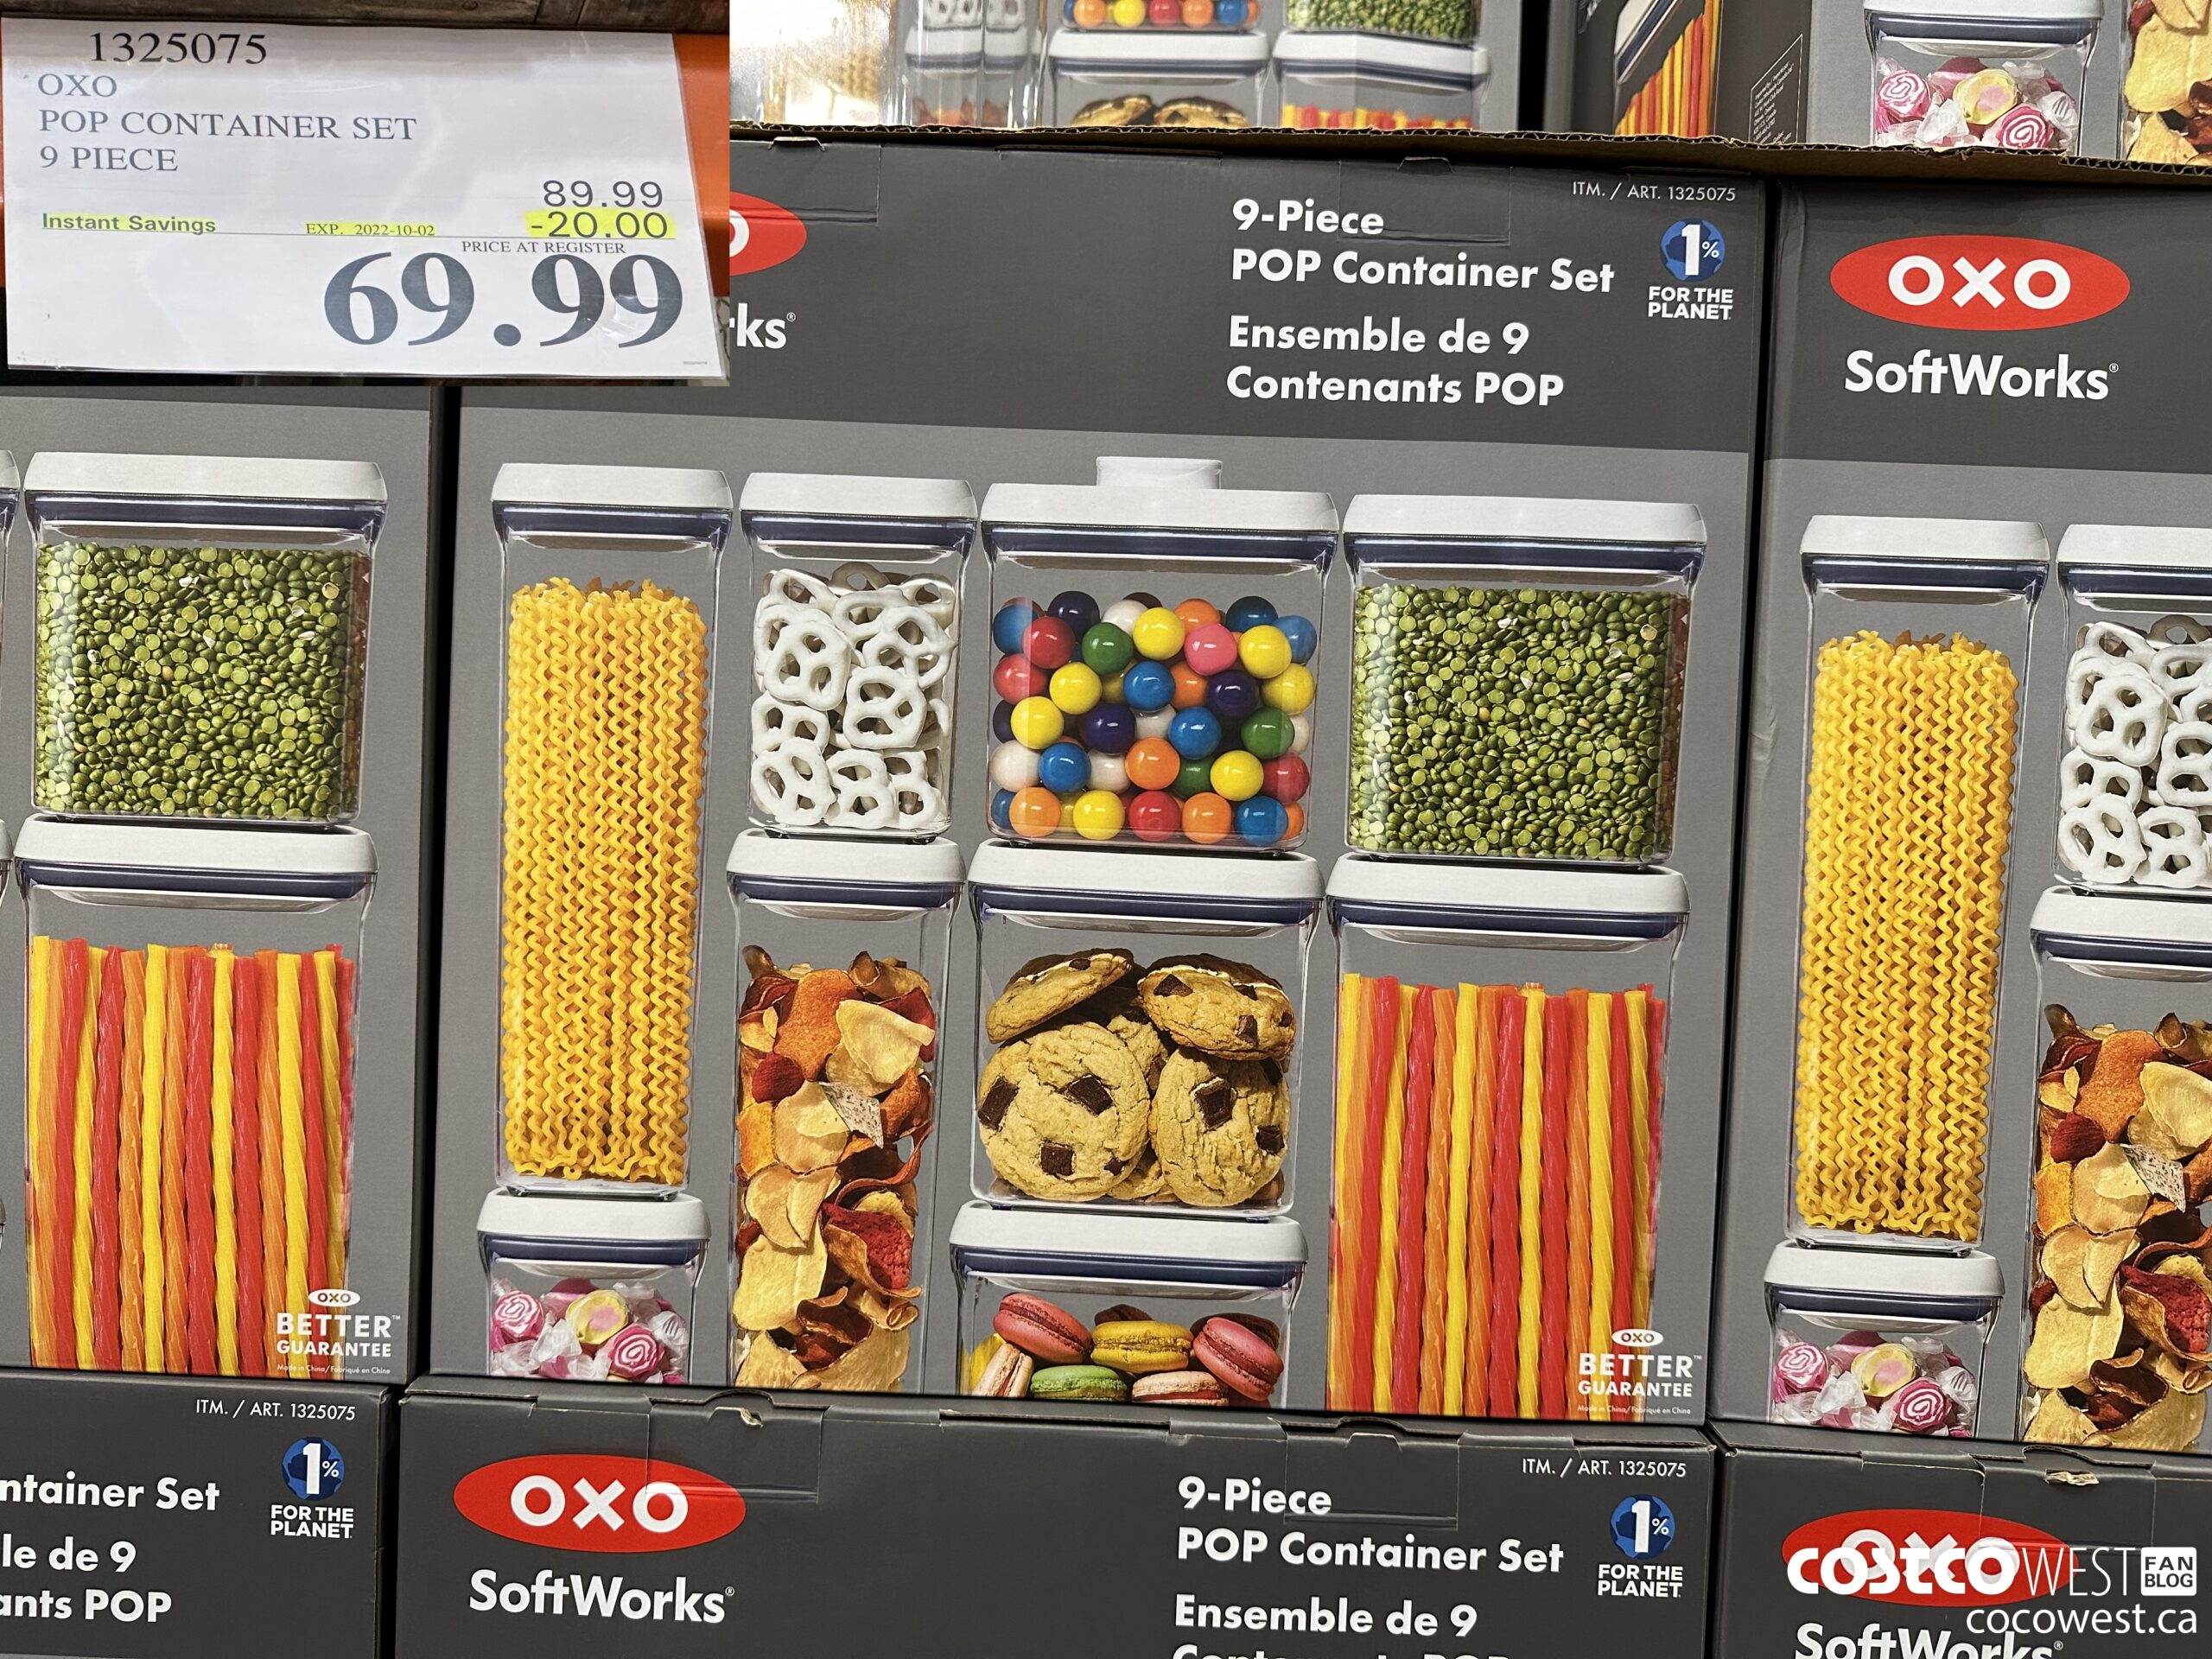 Costco Toys on Clearance, LOL Surprise Mini Sweets 4-Pack Only $6.97 +  More